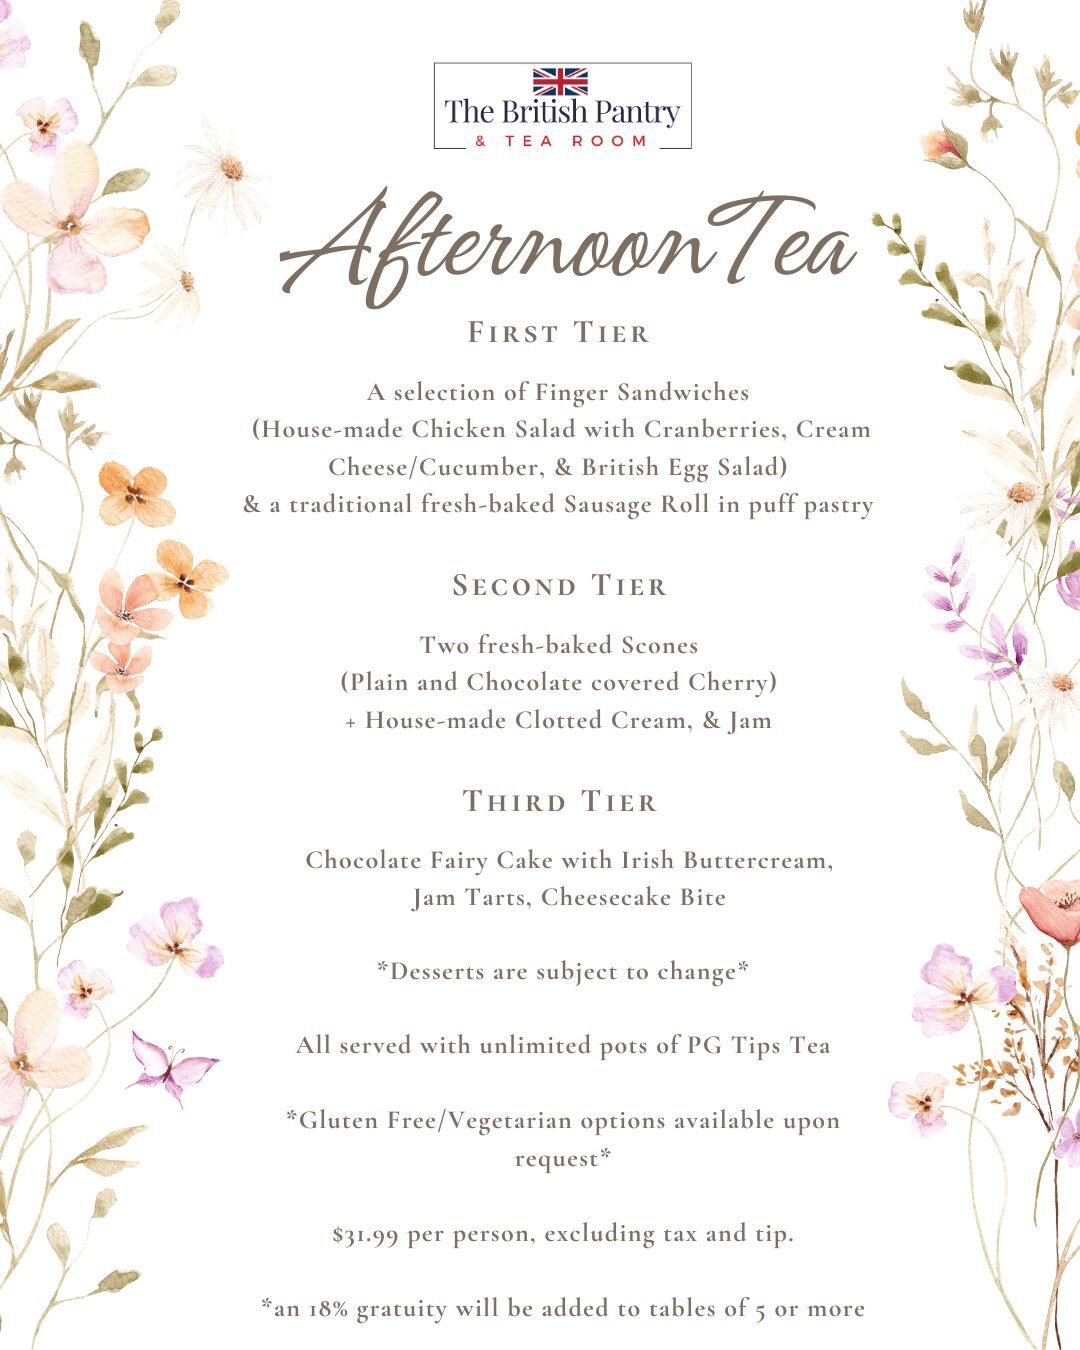 Indulge in our NEW March Afternoon Tea Menu! Join us every Saturday and Sunday from 11am-4pm for a traditional treat featuring our classic finger sandwiches and freshly baked sausage rolls. Don't miss our mouthwatering freshly baked scones&mdash;avai